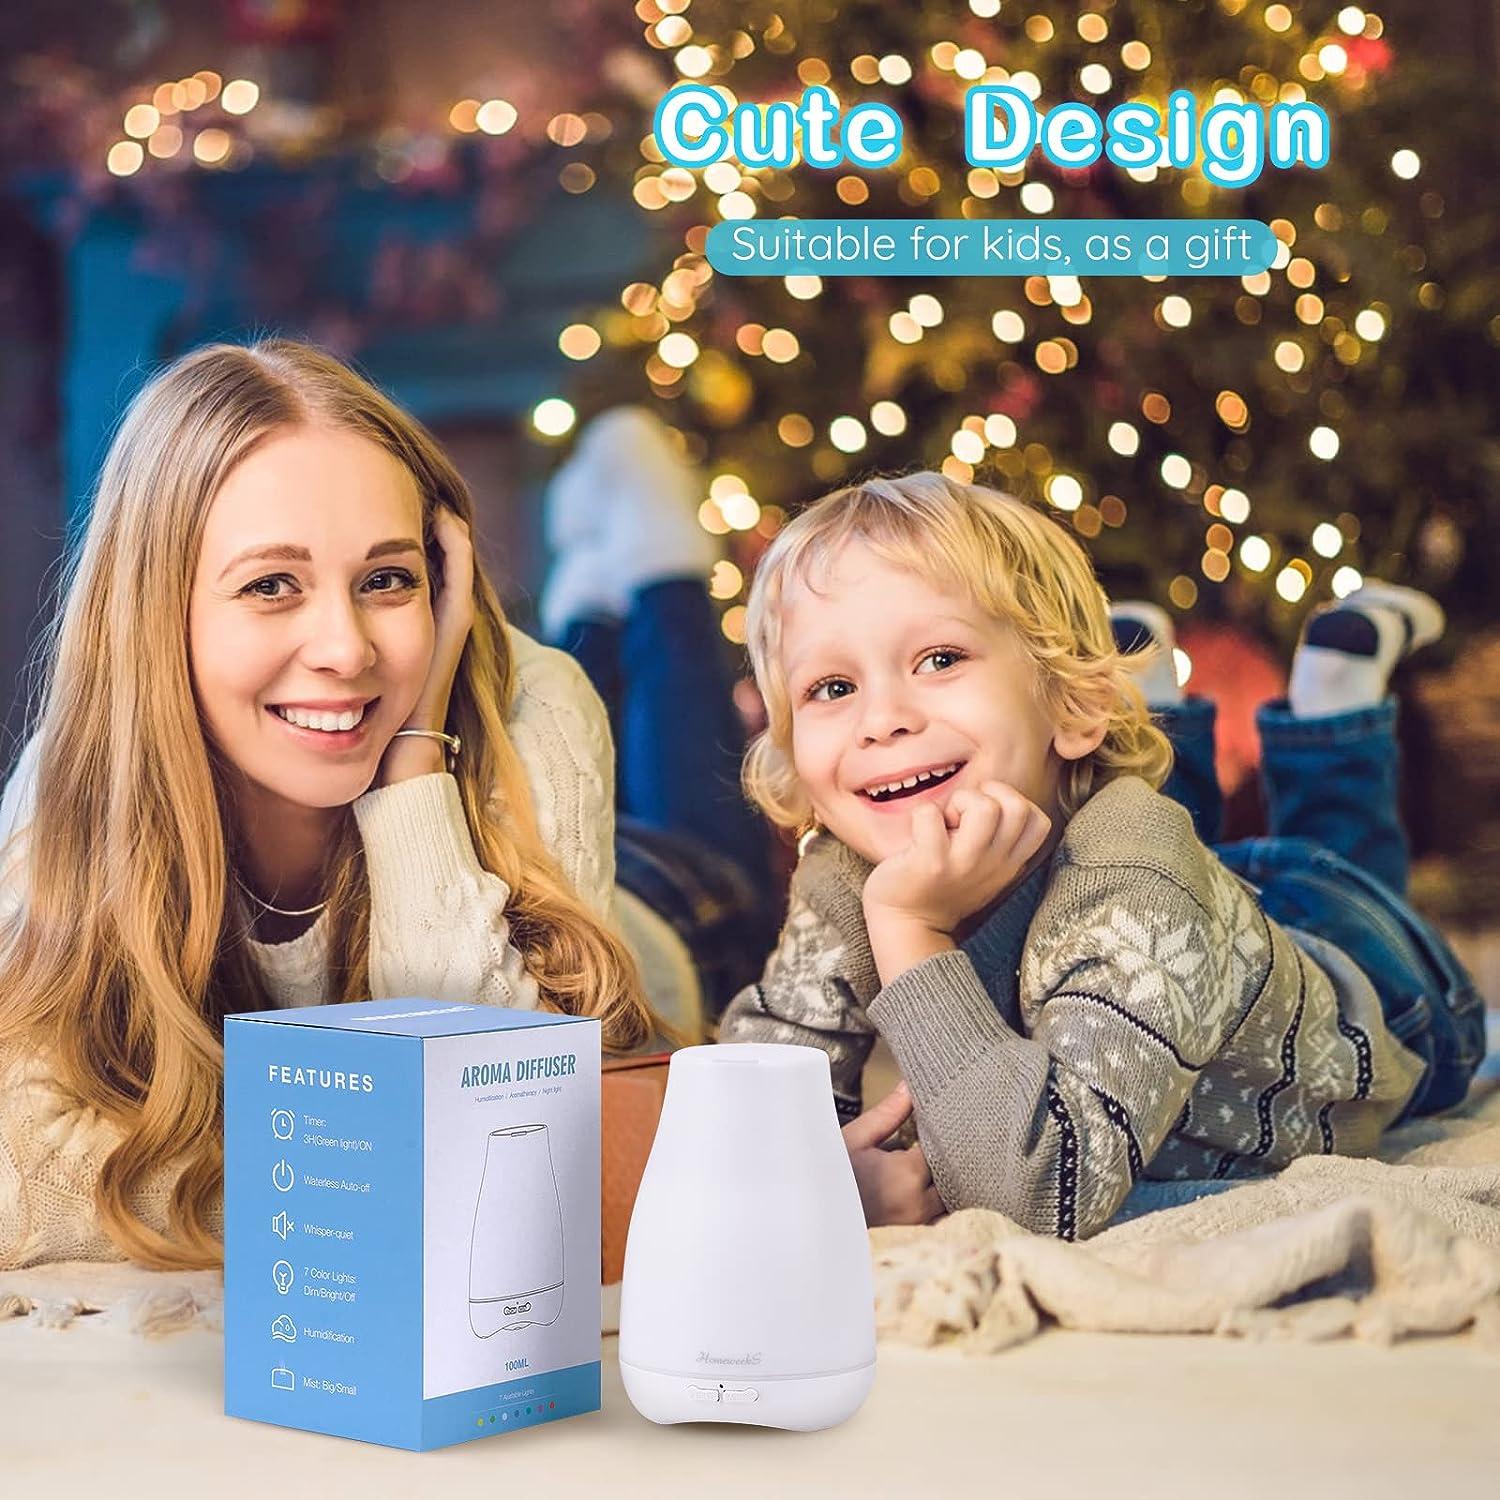 Homeweeks Diffusers, 100ml Colorful Essential Oil Diffuser with Adjustable  Mist Mode,Auto Off Aroma Diffuser for Bedroom/Office/Trip (100 ML 1 Pack)  Basic White